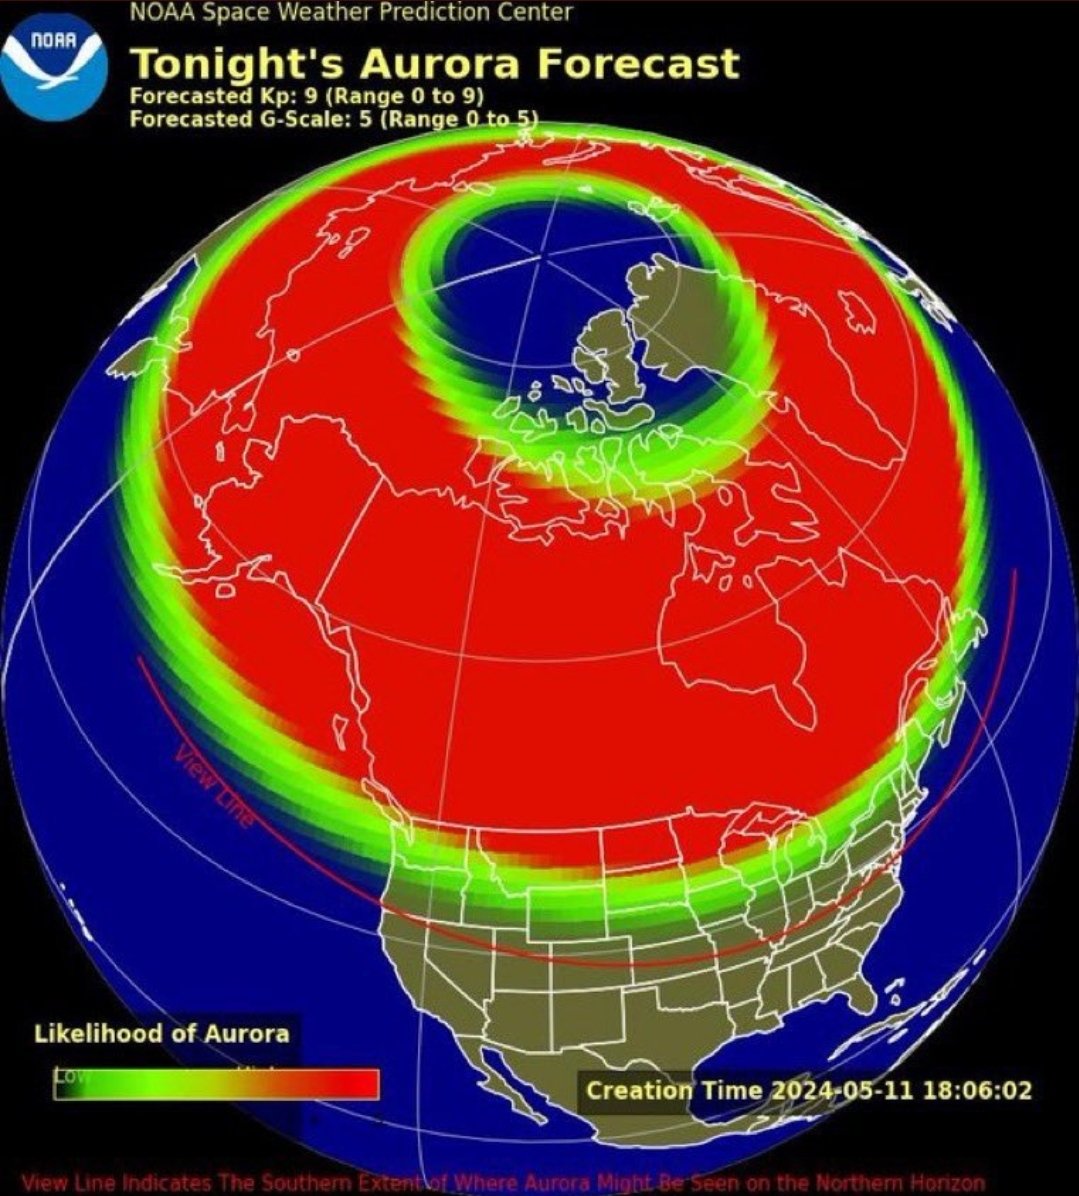 Well this is quite the forecast! @NWSSWPC is explicitly forecasting a G5 geomagnetic storm tonight. We could be in for quite the show (again) tonight!